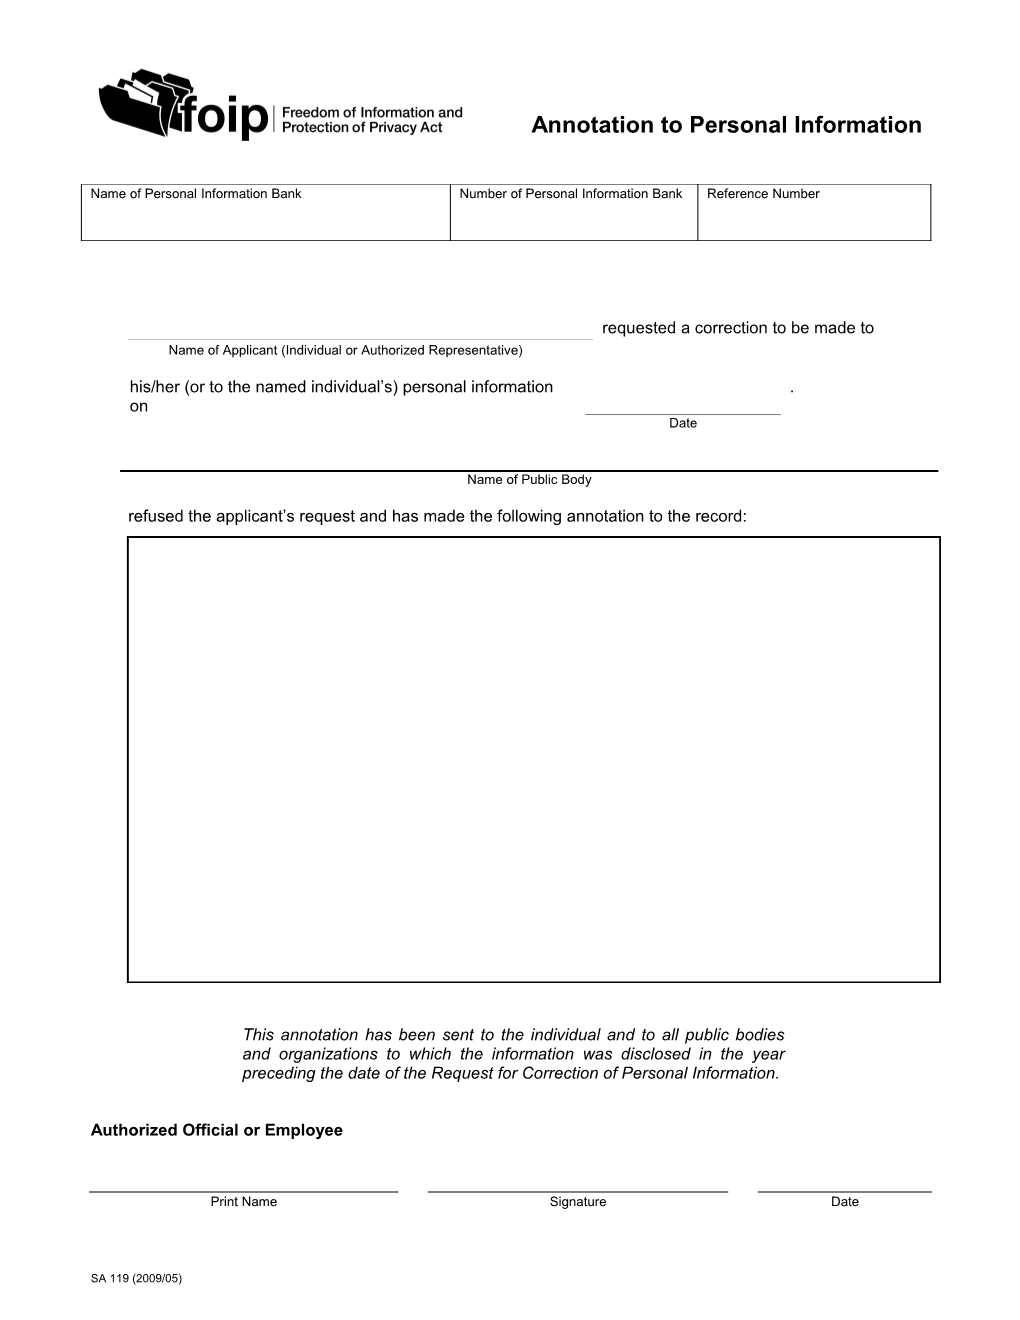 Annotation to Personal Information Form